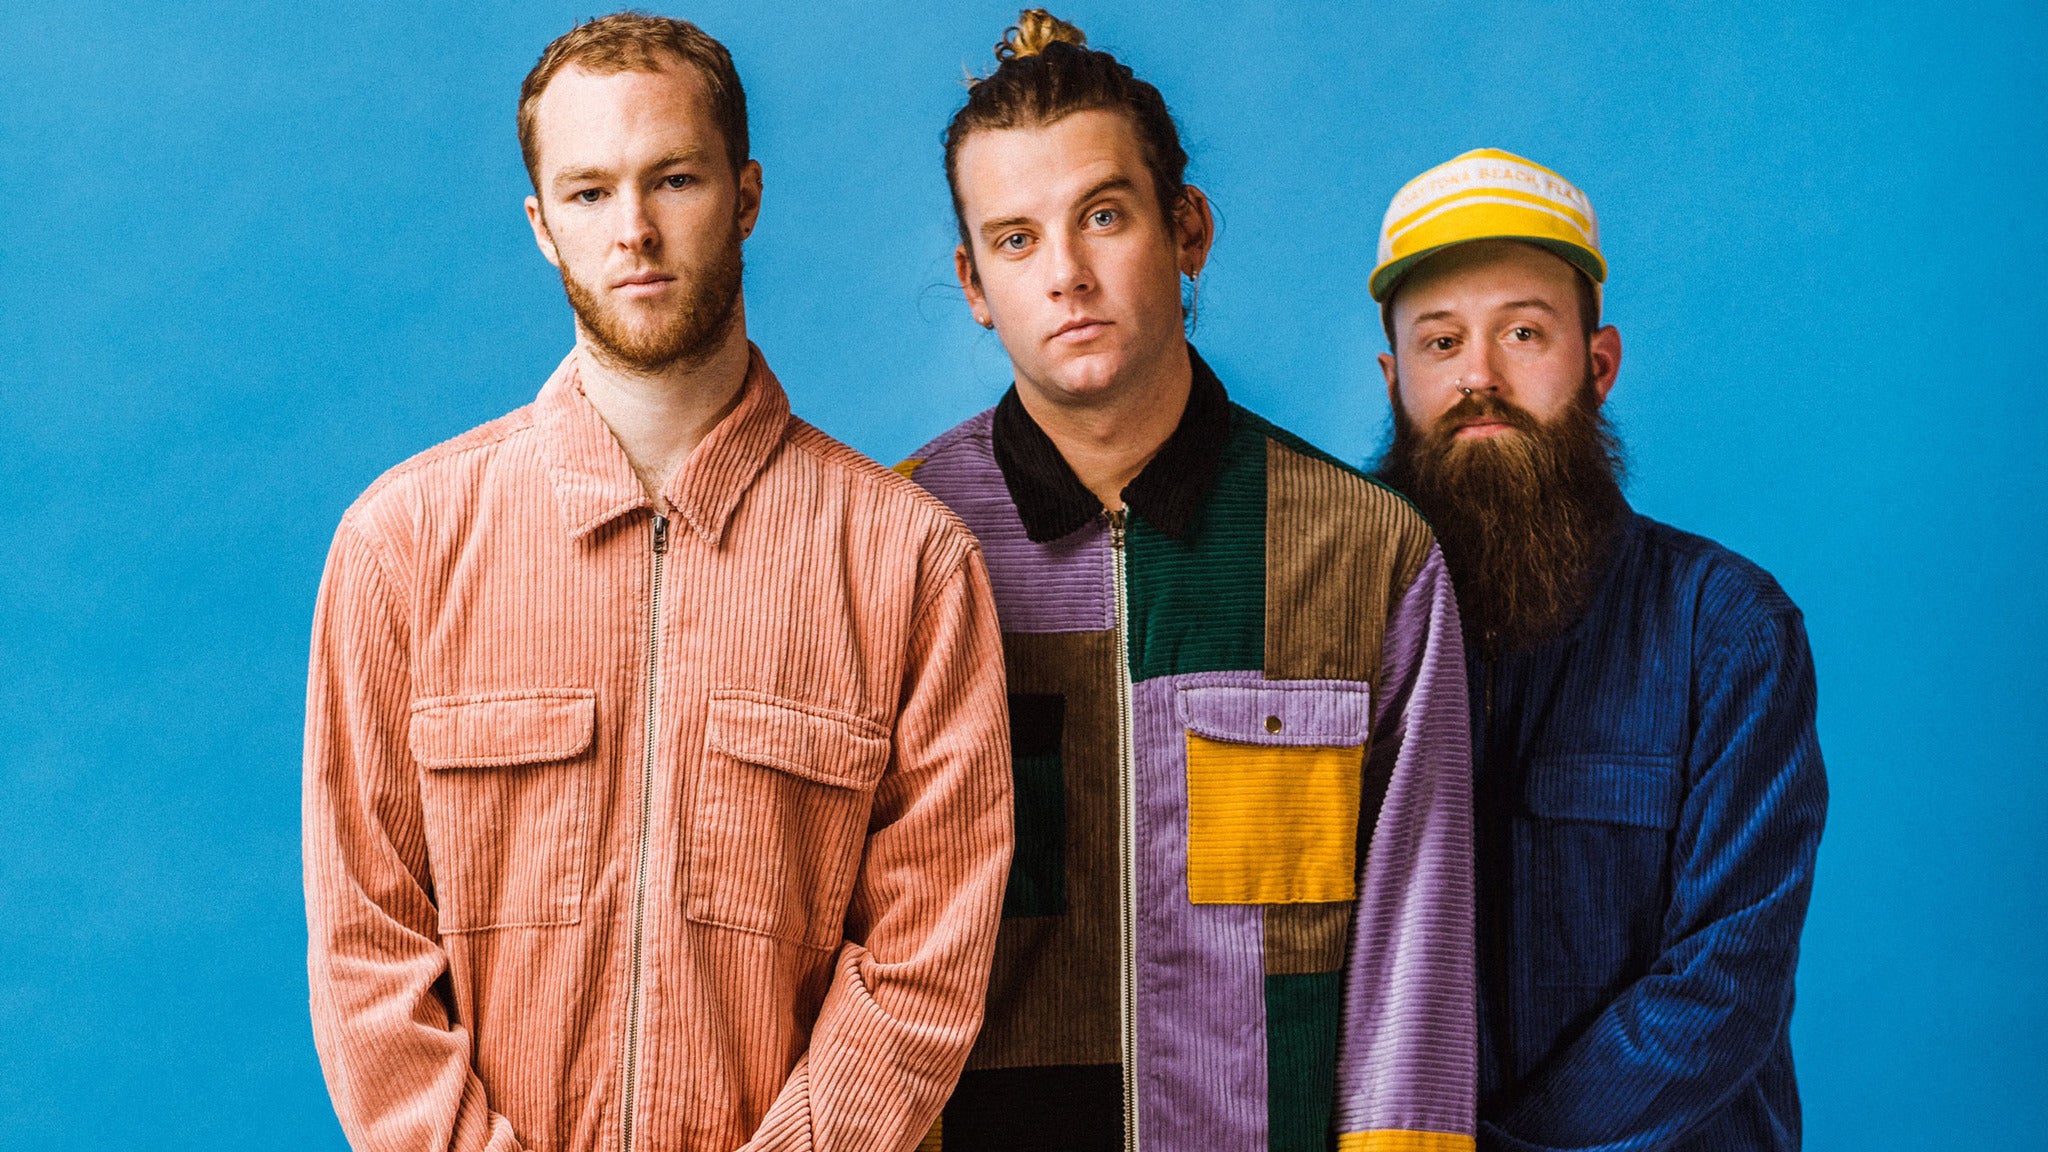 Judah & the Lion - Going to Mars Tour in Kansas City promo photo for Local presale offer code